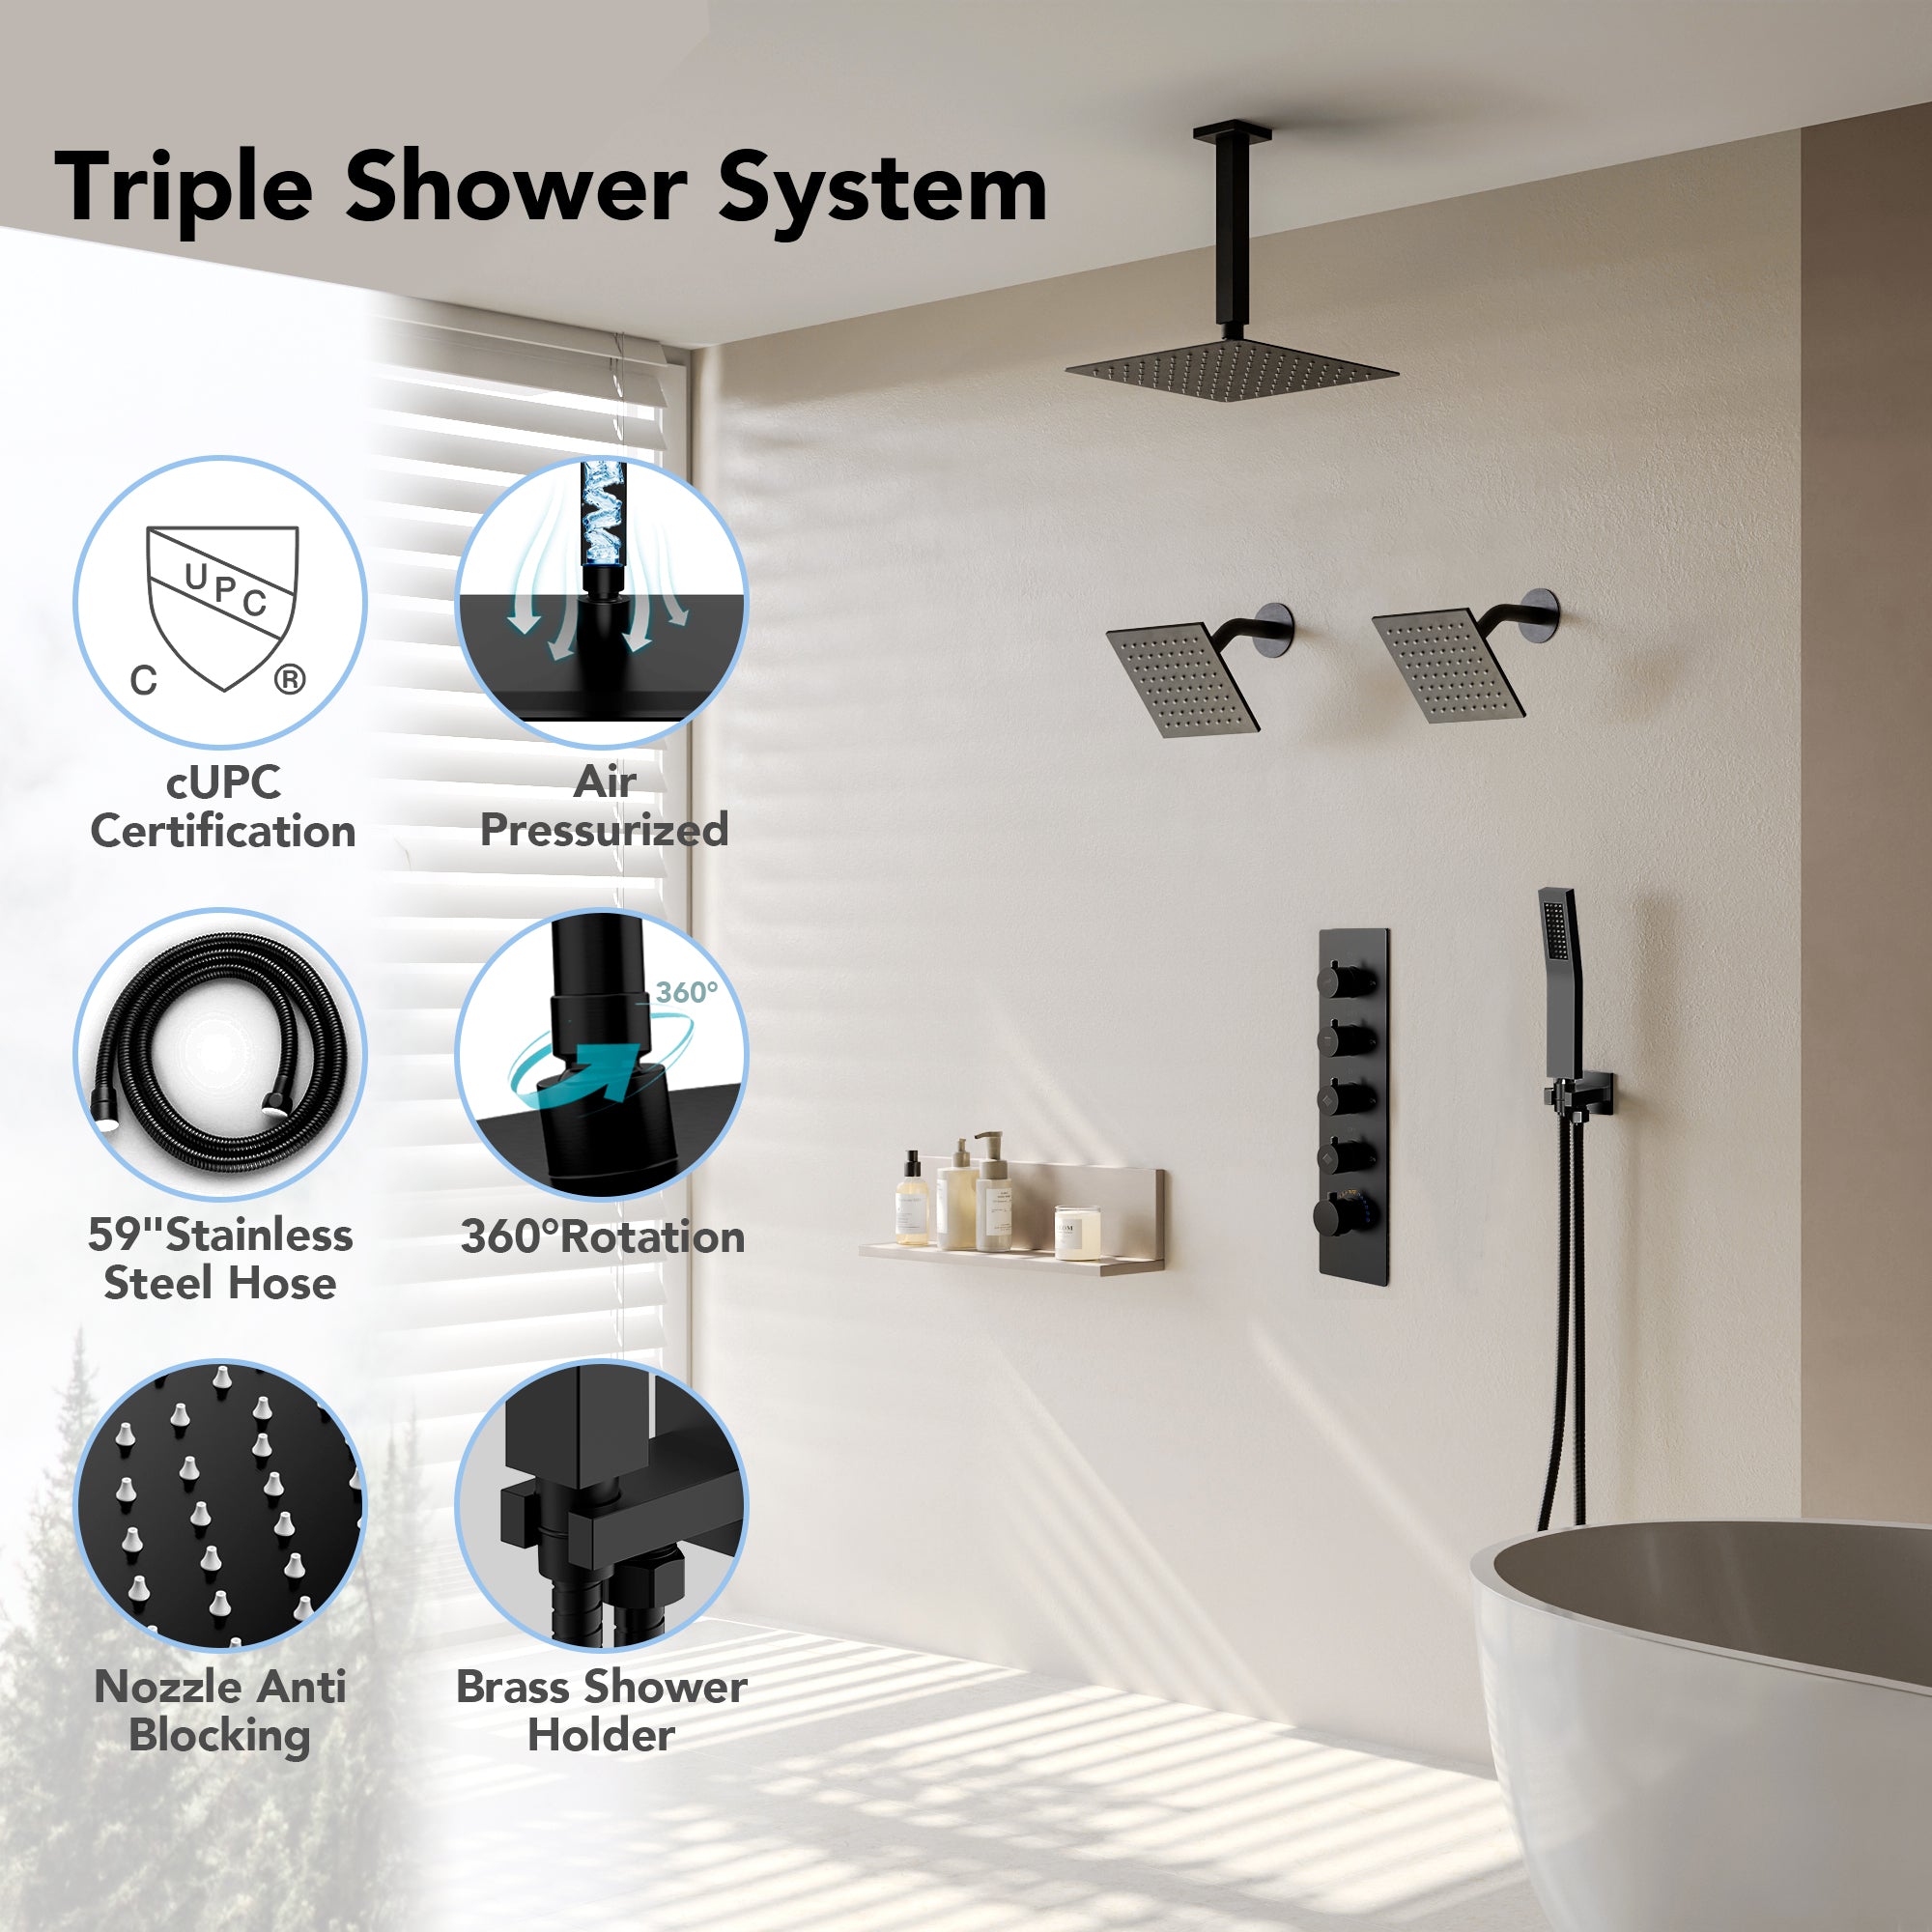 EVERSTEIN SFS-1062-BK16 16" High-Pressure Rainfall Complete Shower System with Rough-in Valve